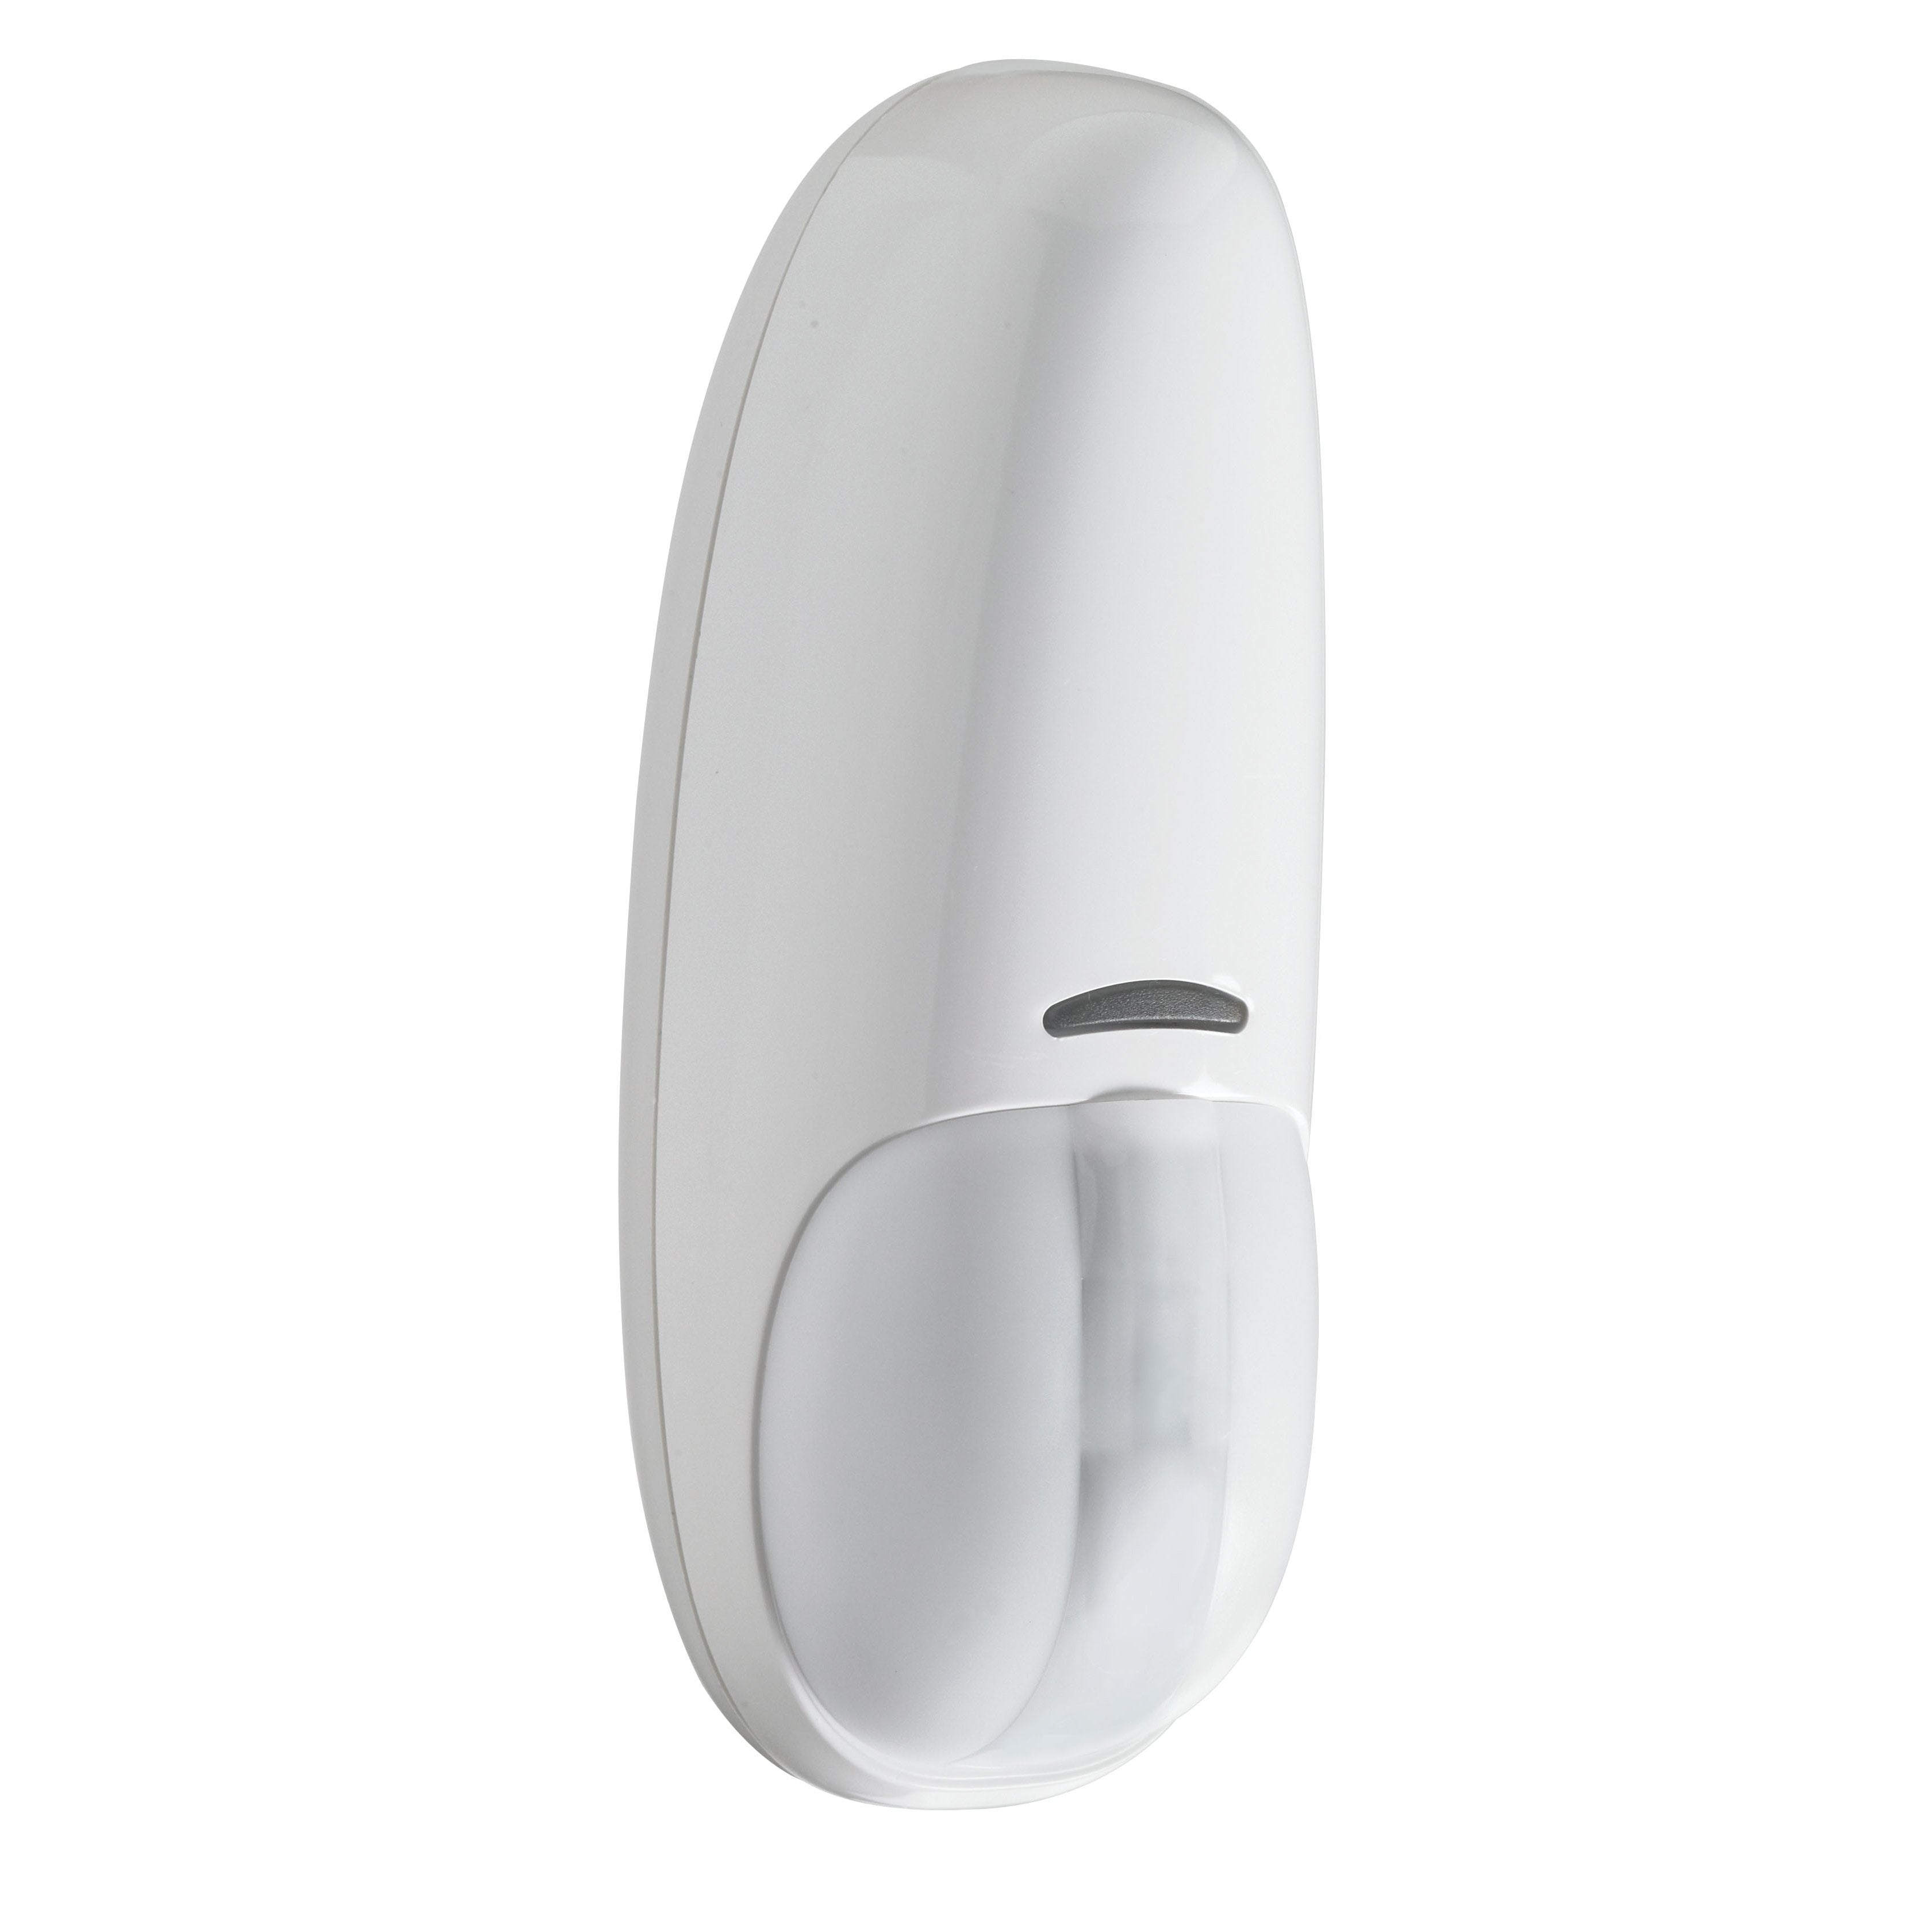 DSC* Power-G Wireless Curtain PIR Motion Detector and Range Selectable: 2M, 4M and 6M